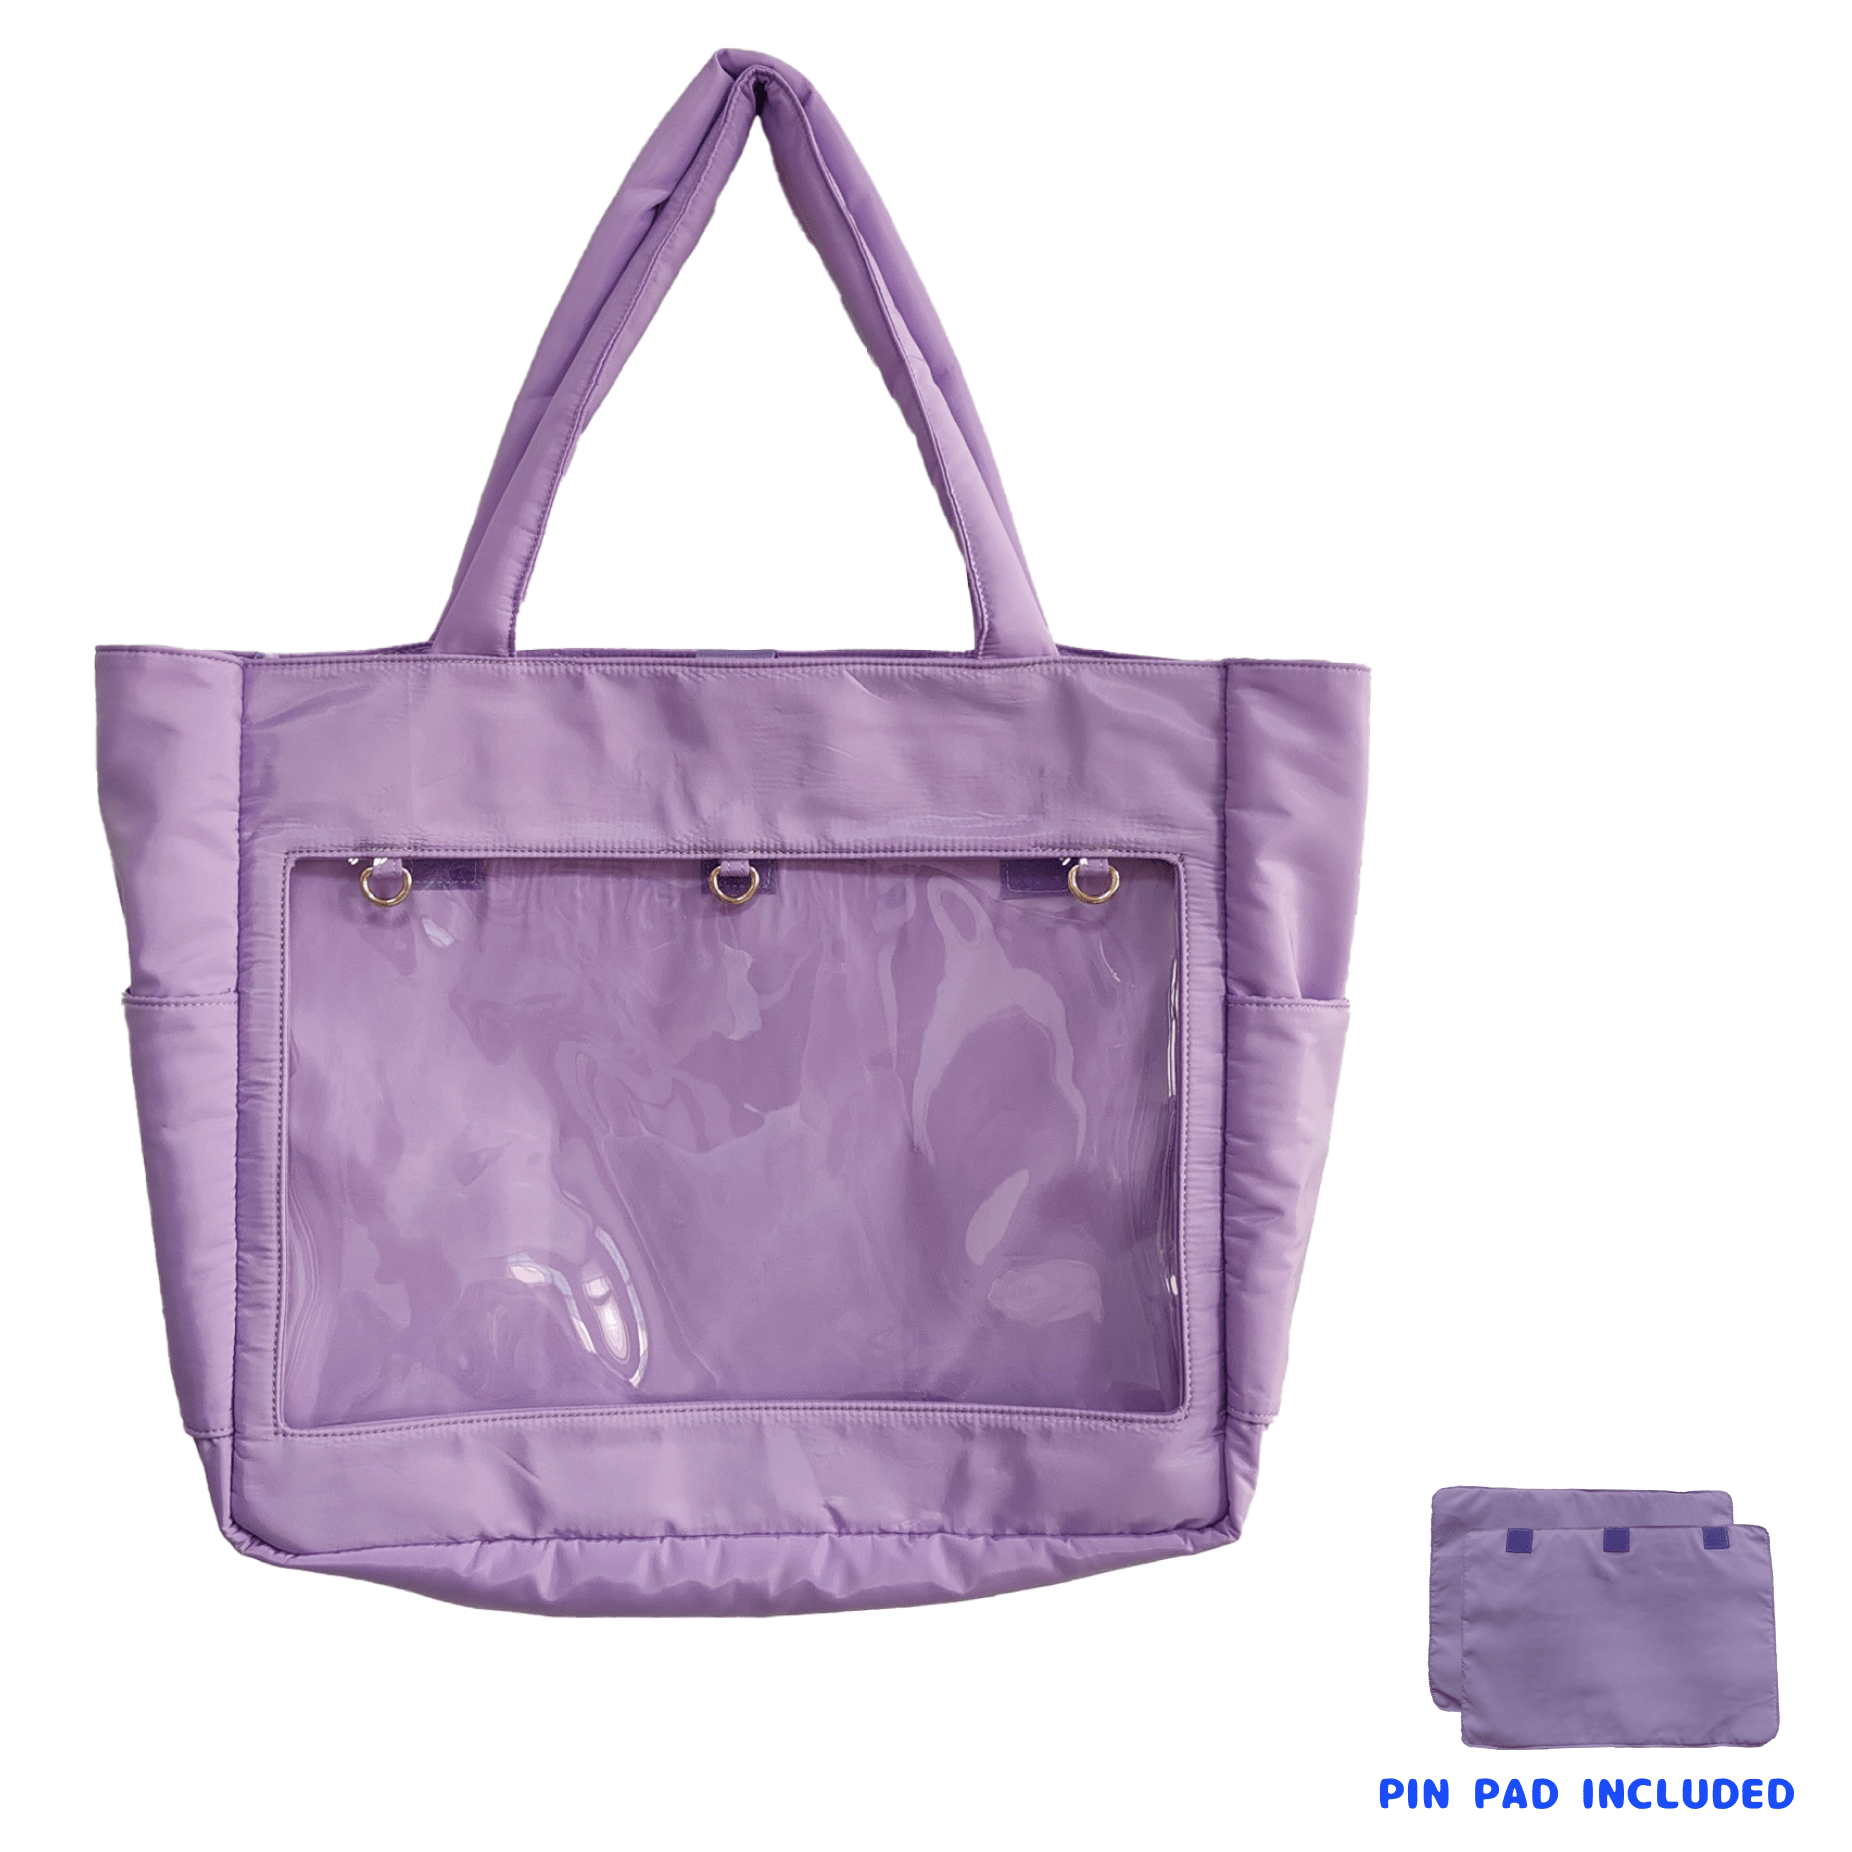 pinbuds Bags Purple Polyester ( ft puffy handle) Pin ITA Tote Bag v2 (purple polyester) ft Puffy handles